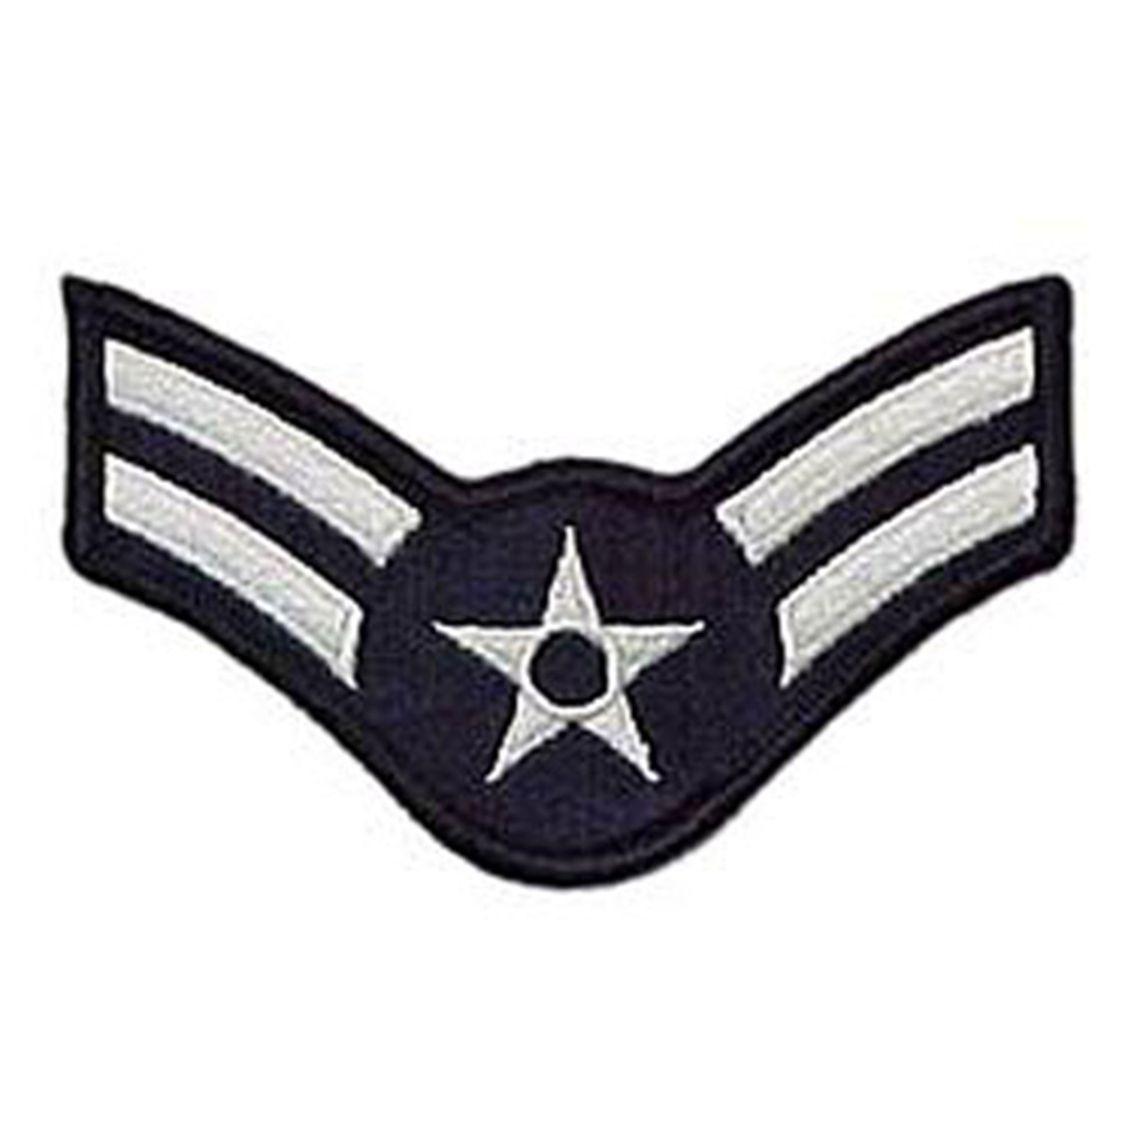 Us Air Force Old Logo - Air Force Rank A1c E 3 Blue Chevron Large. Exchange Select